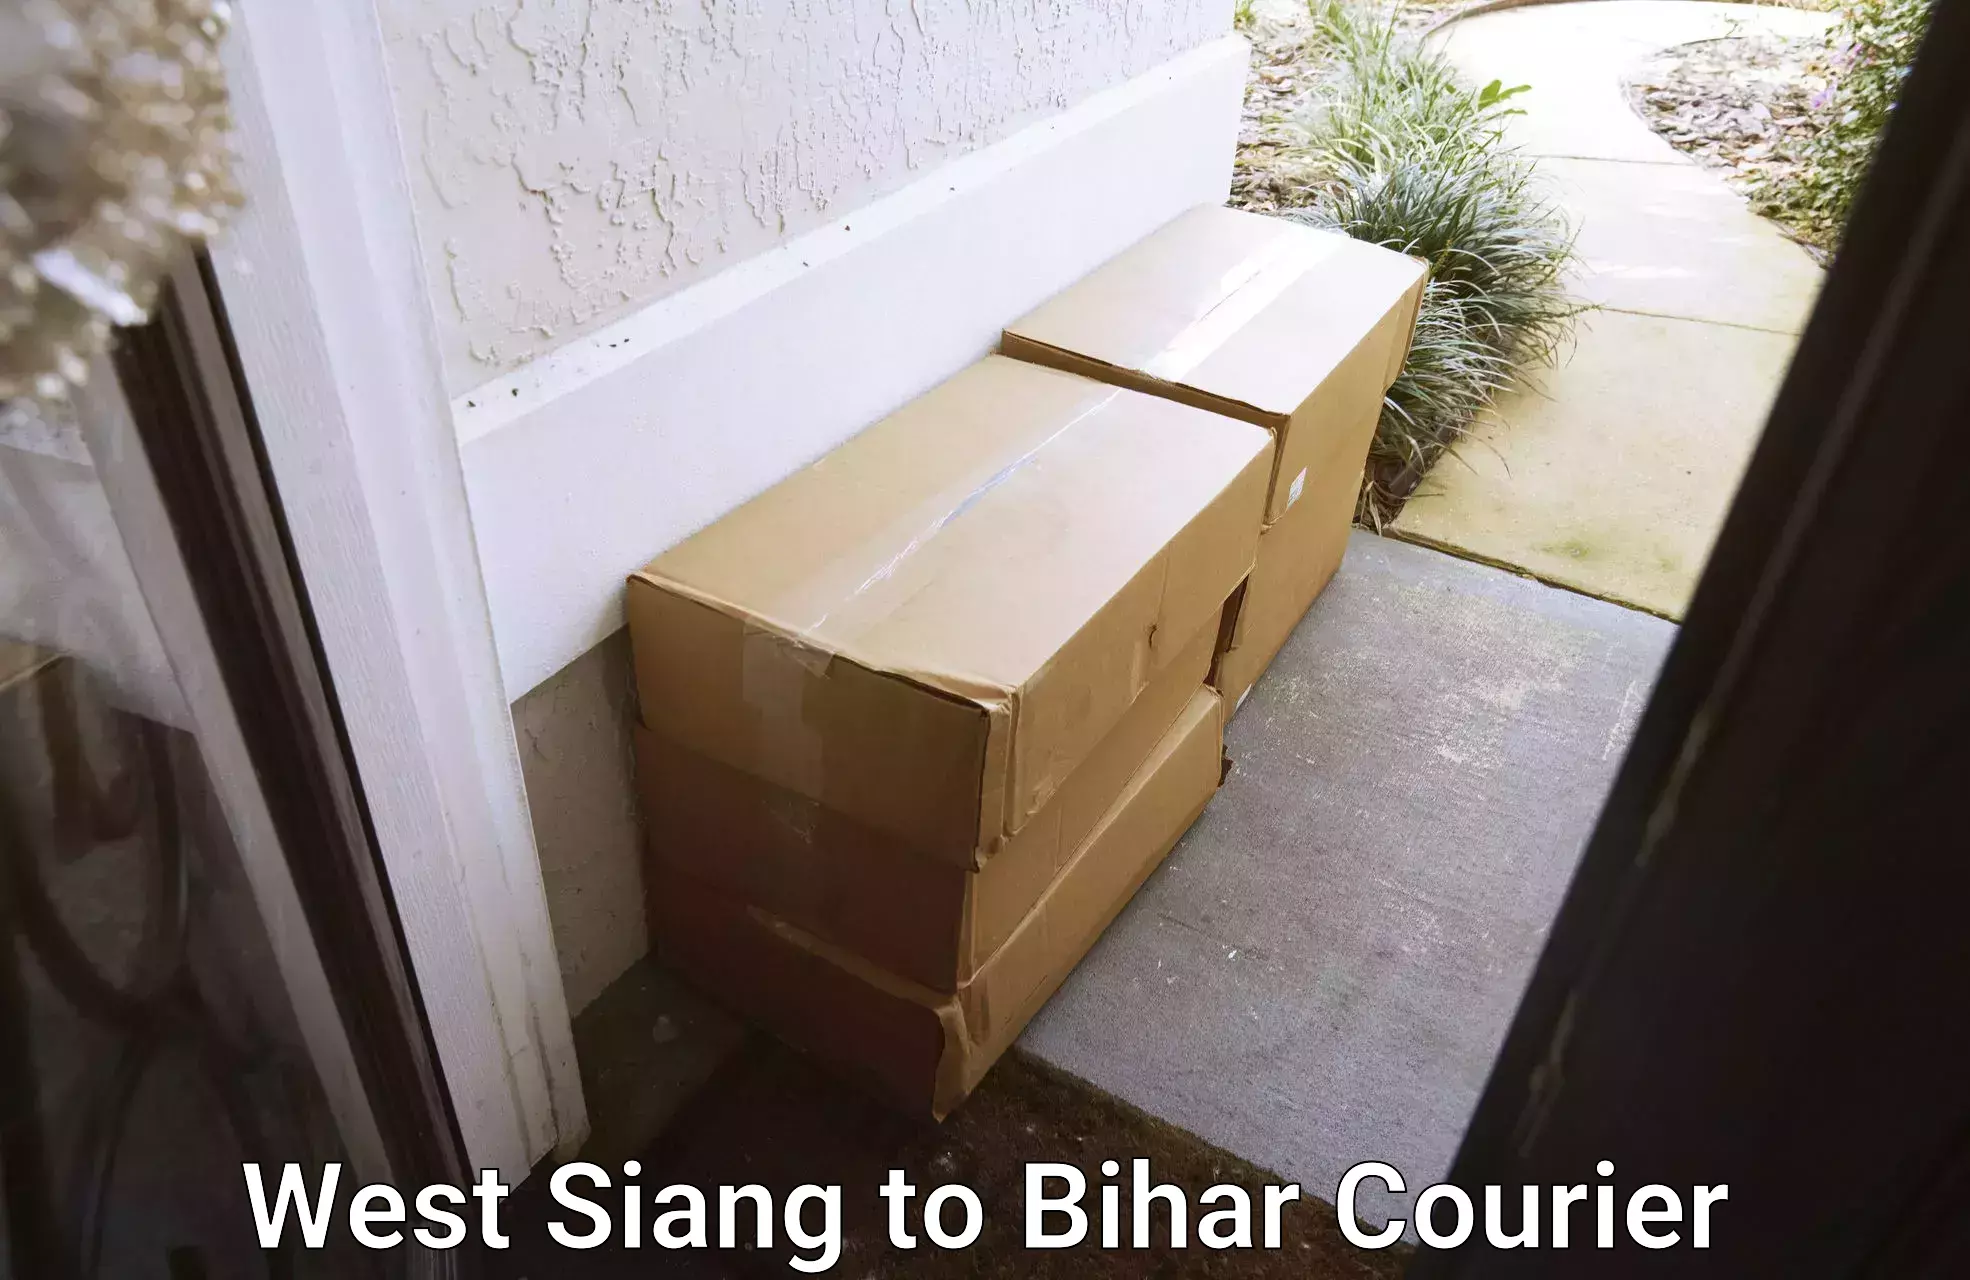 Flexible parcel services West Siang to Bihar